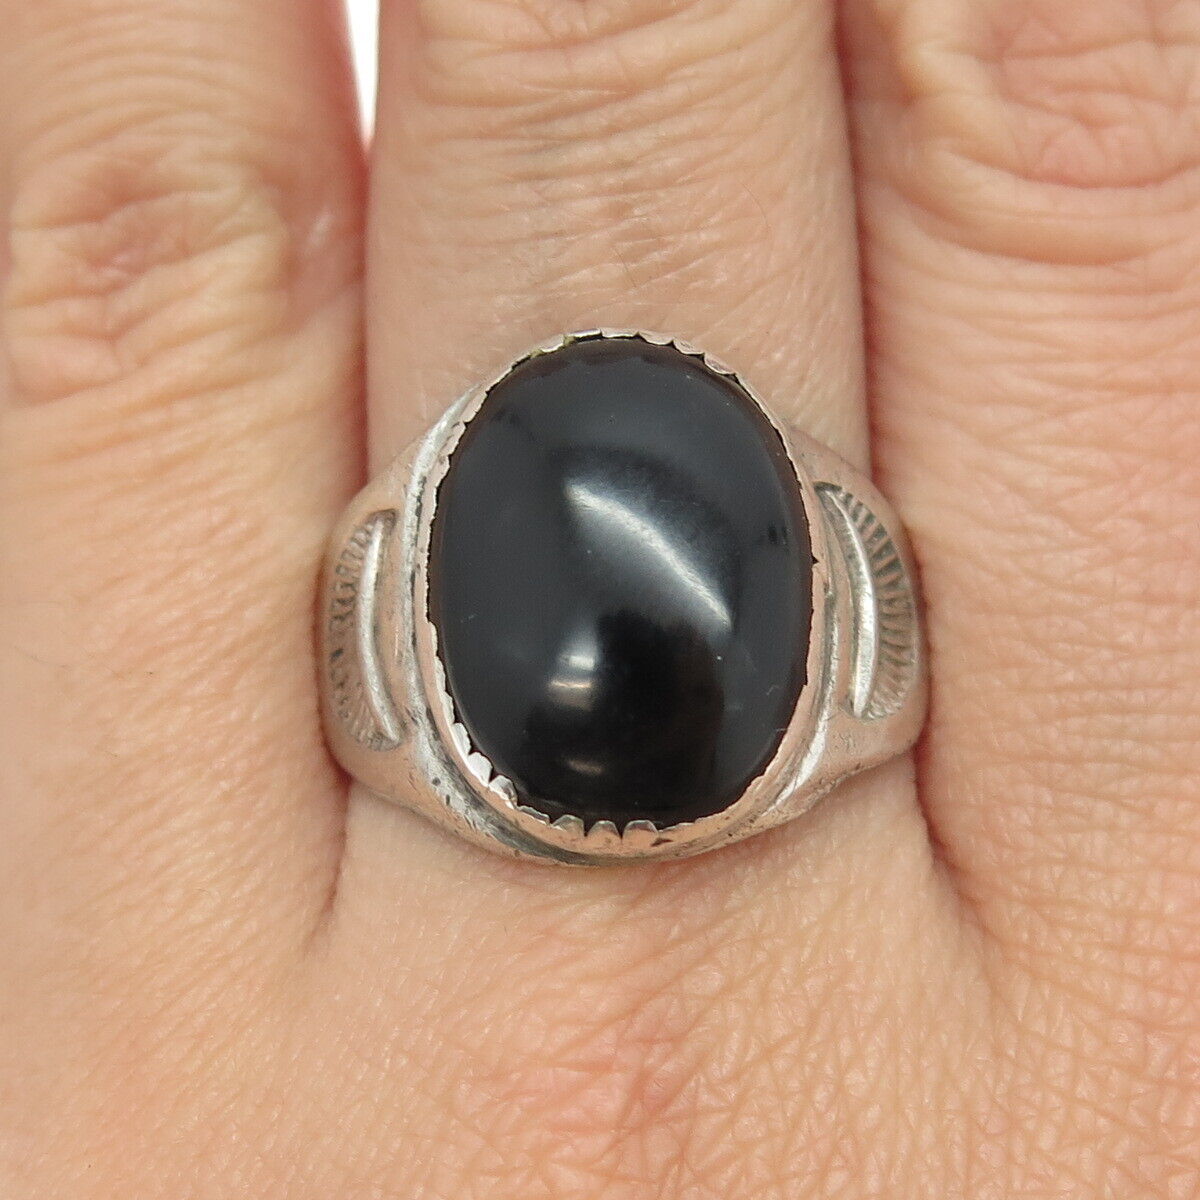 H. BEAGAY Old Pawn Sterling Silver Southwestern Real Black Onyx Ring Size 10.75